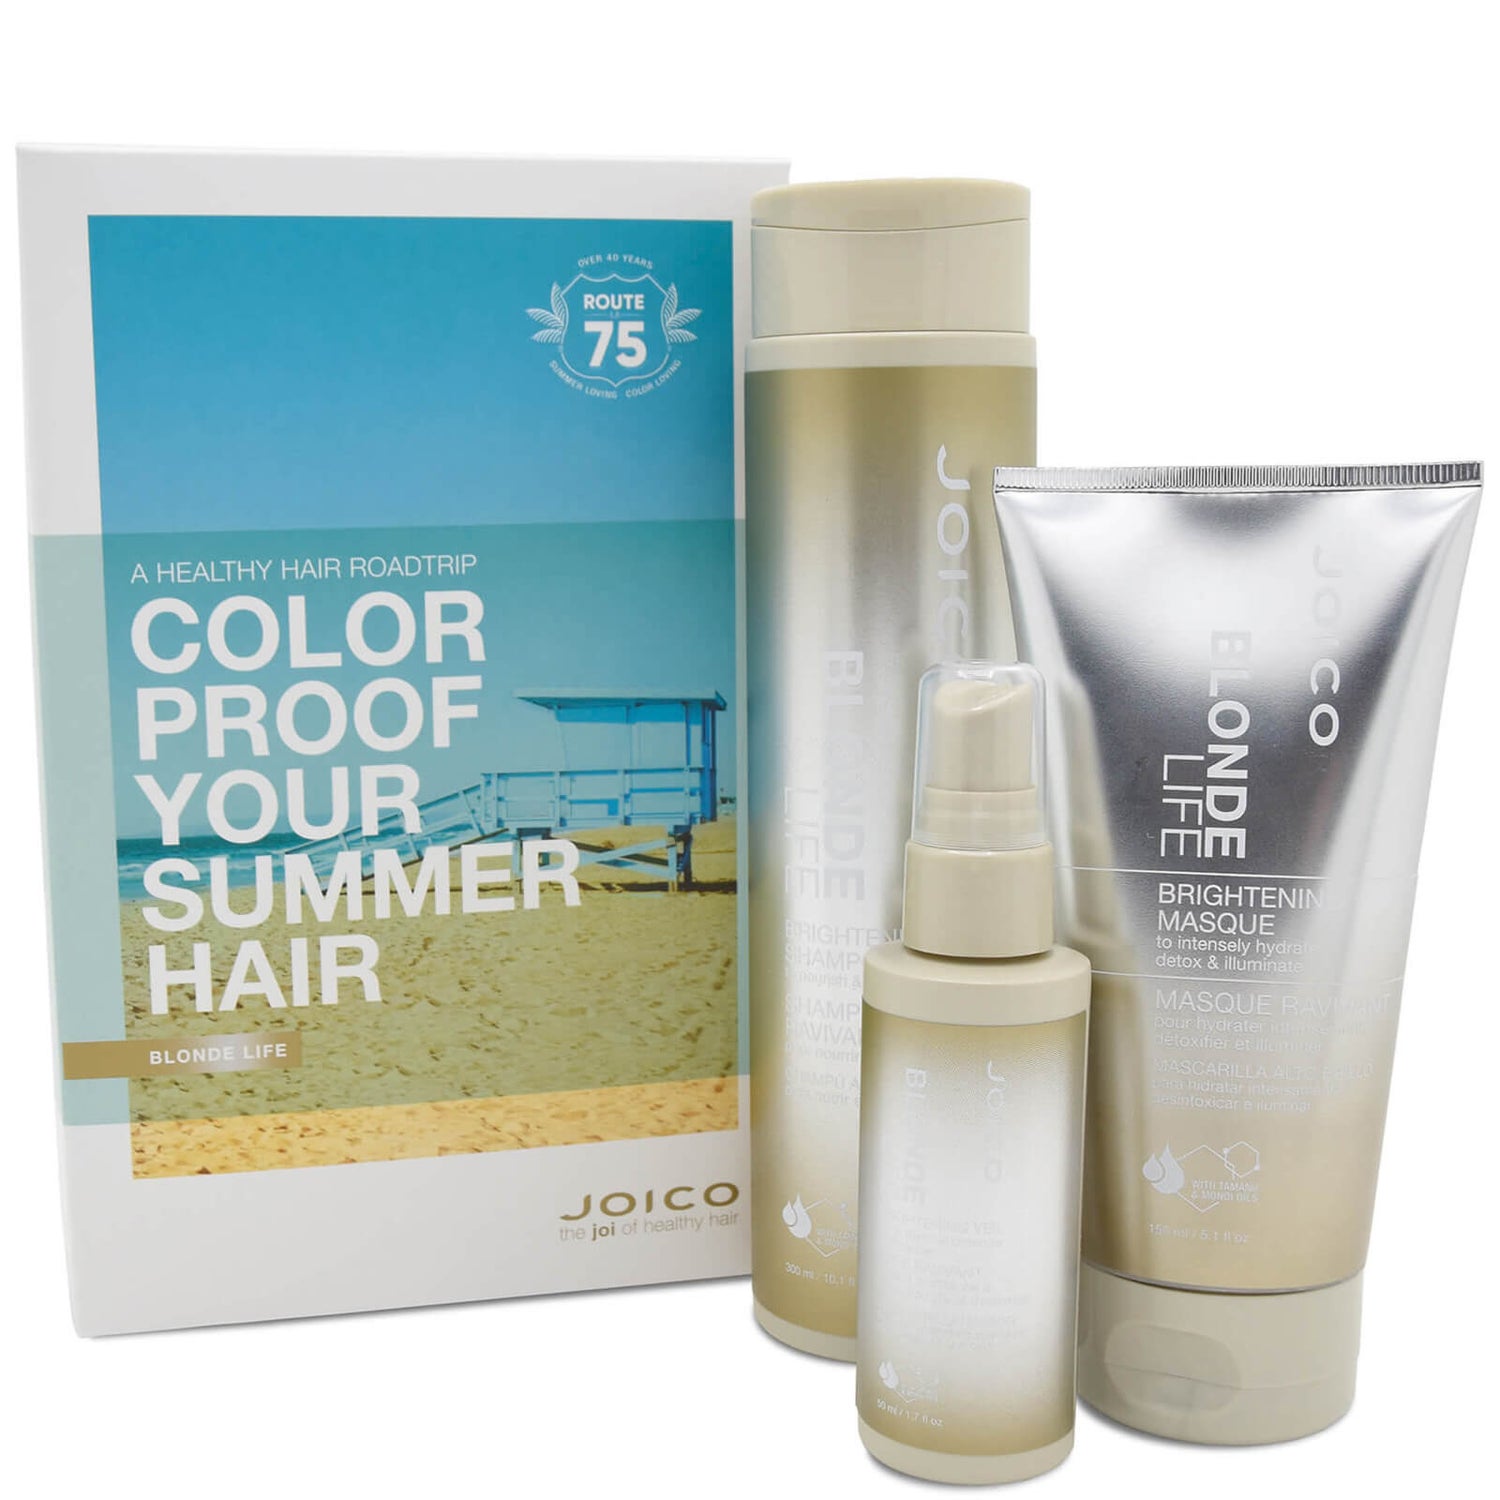 Joico Blonde Life Color Proof Your Summer Hair Trio Pack (Worth $49)